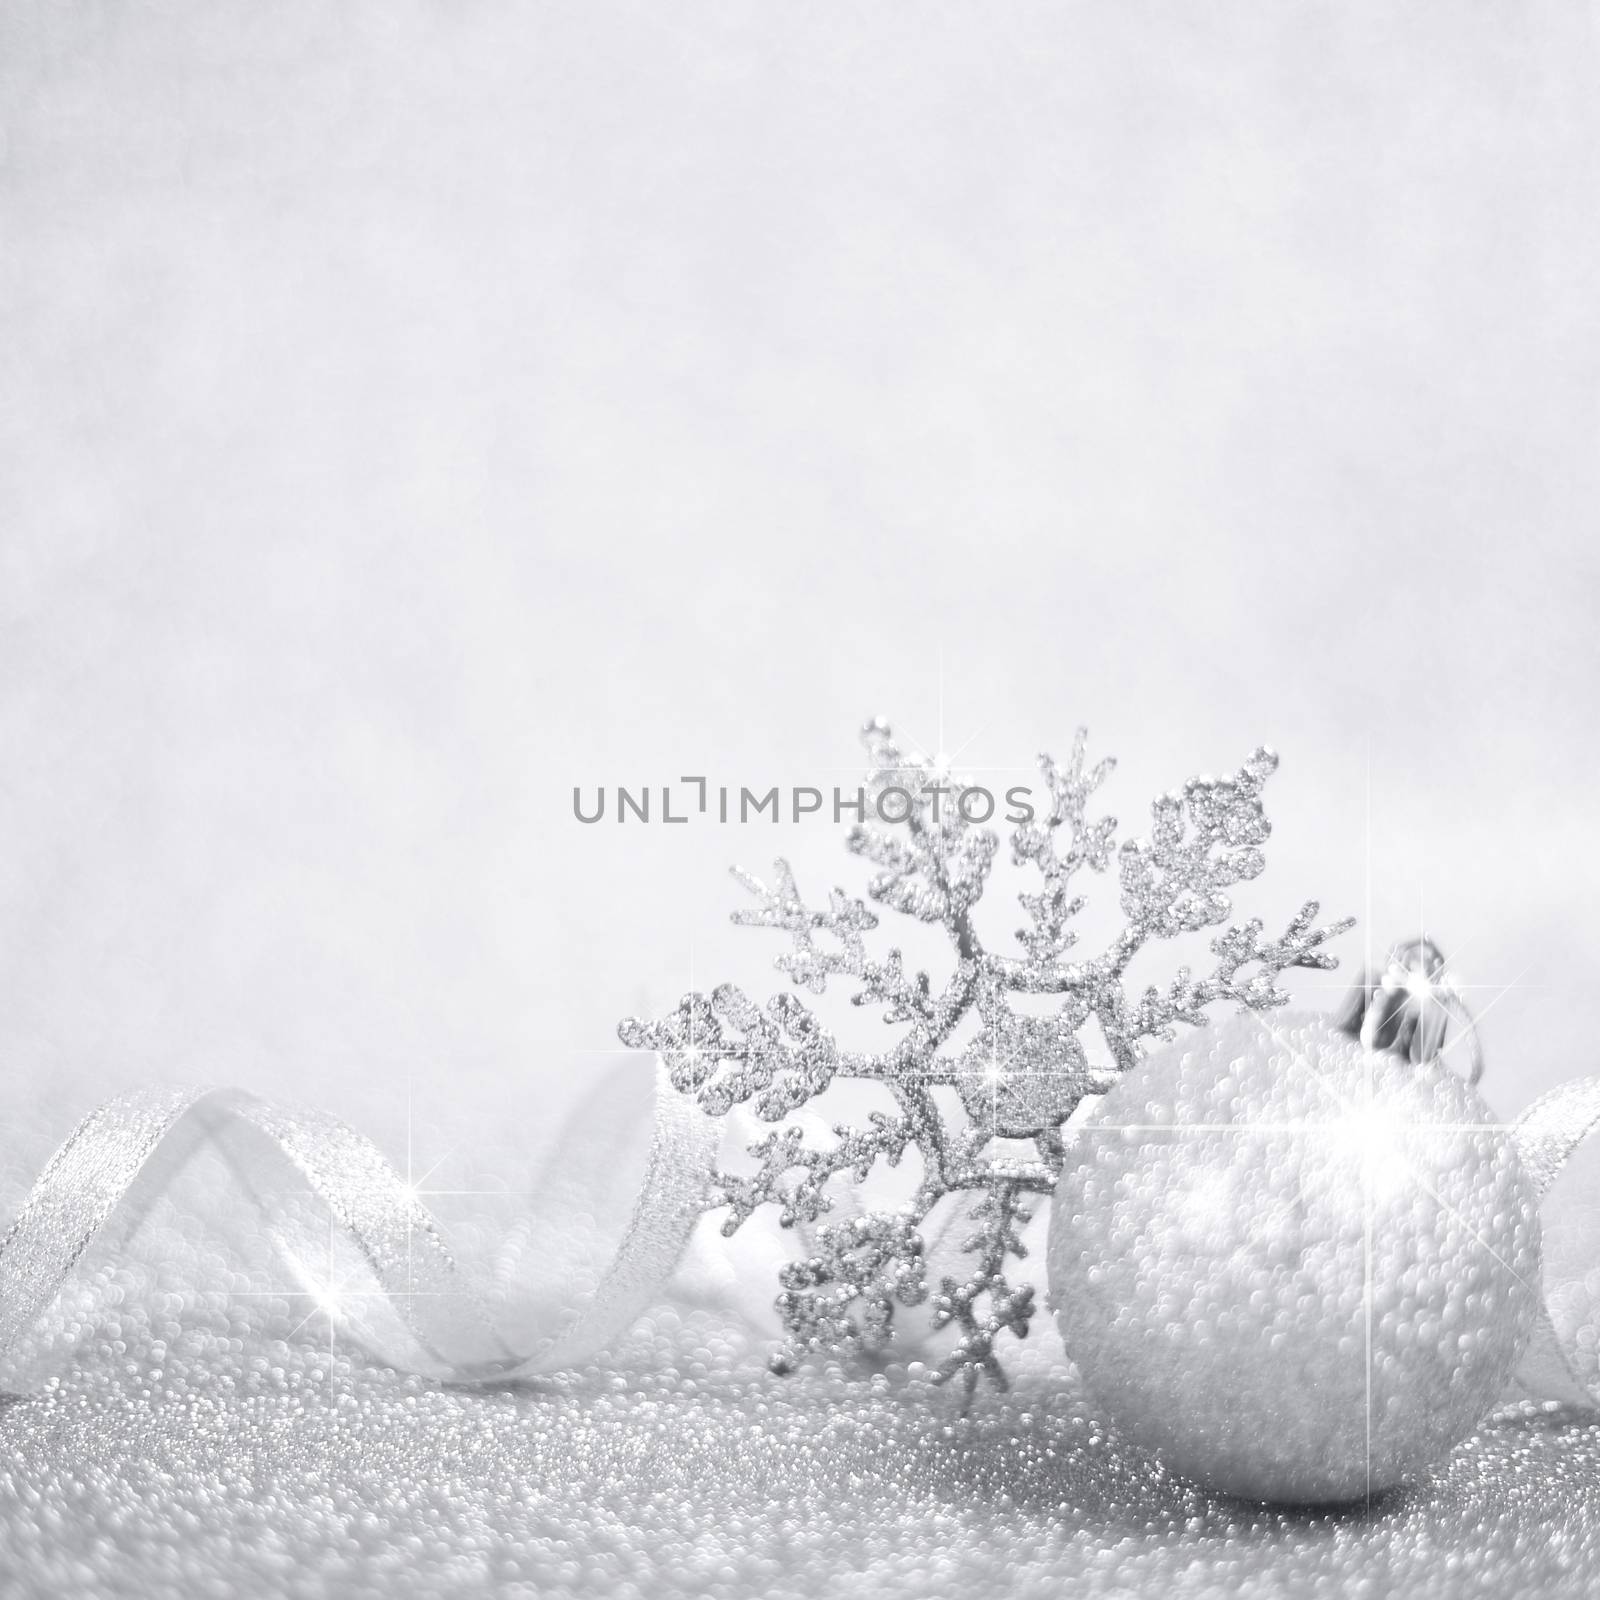 Silver christmas balls and snowflakes on shining glitter background with copy space